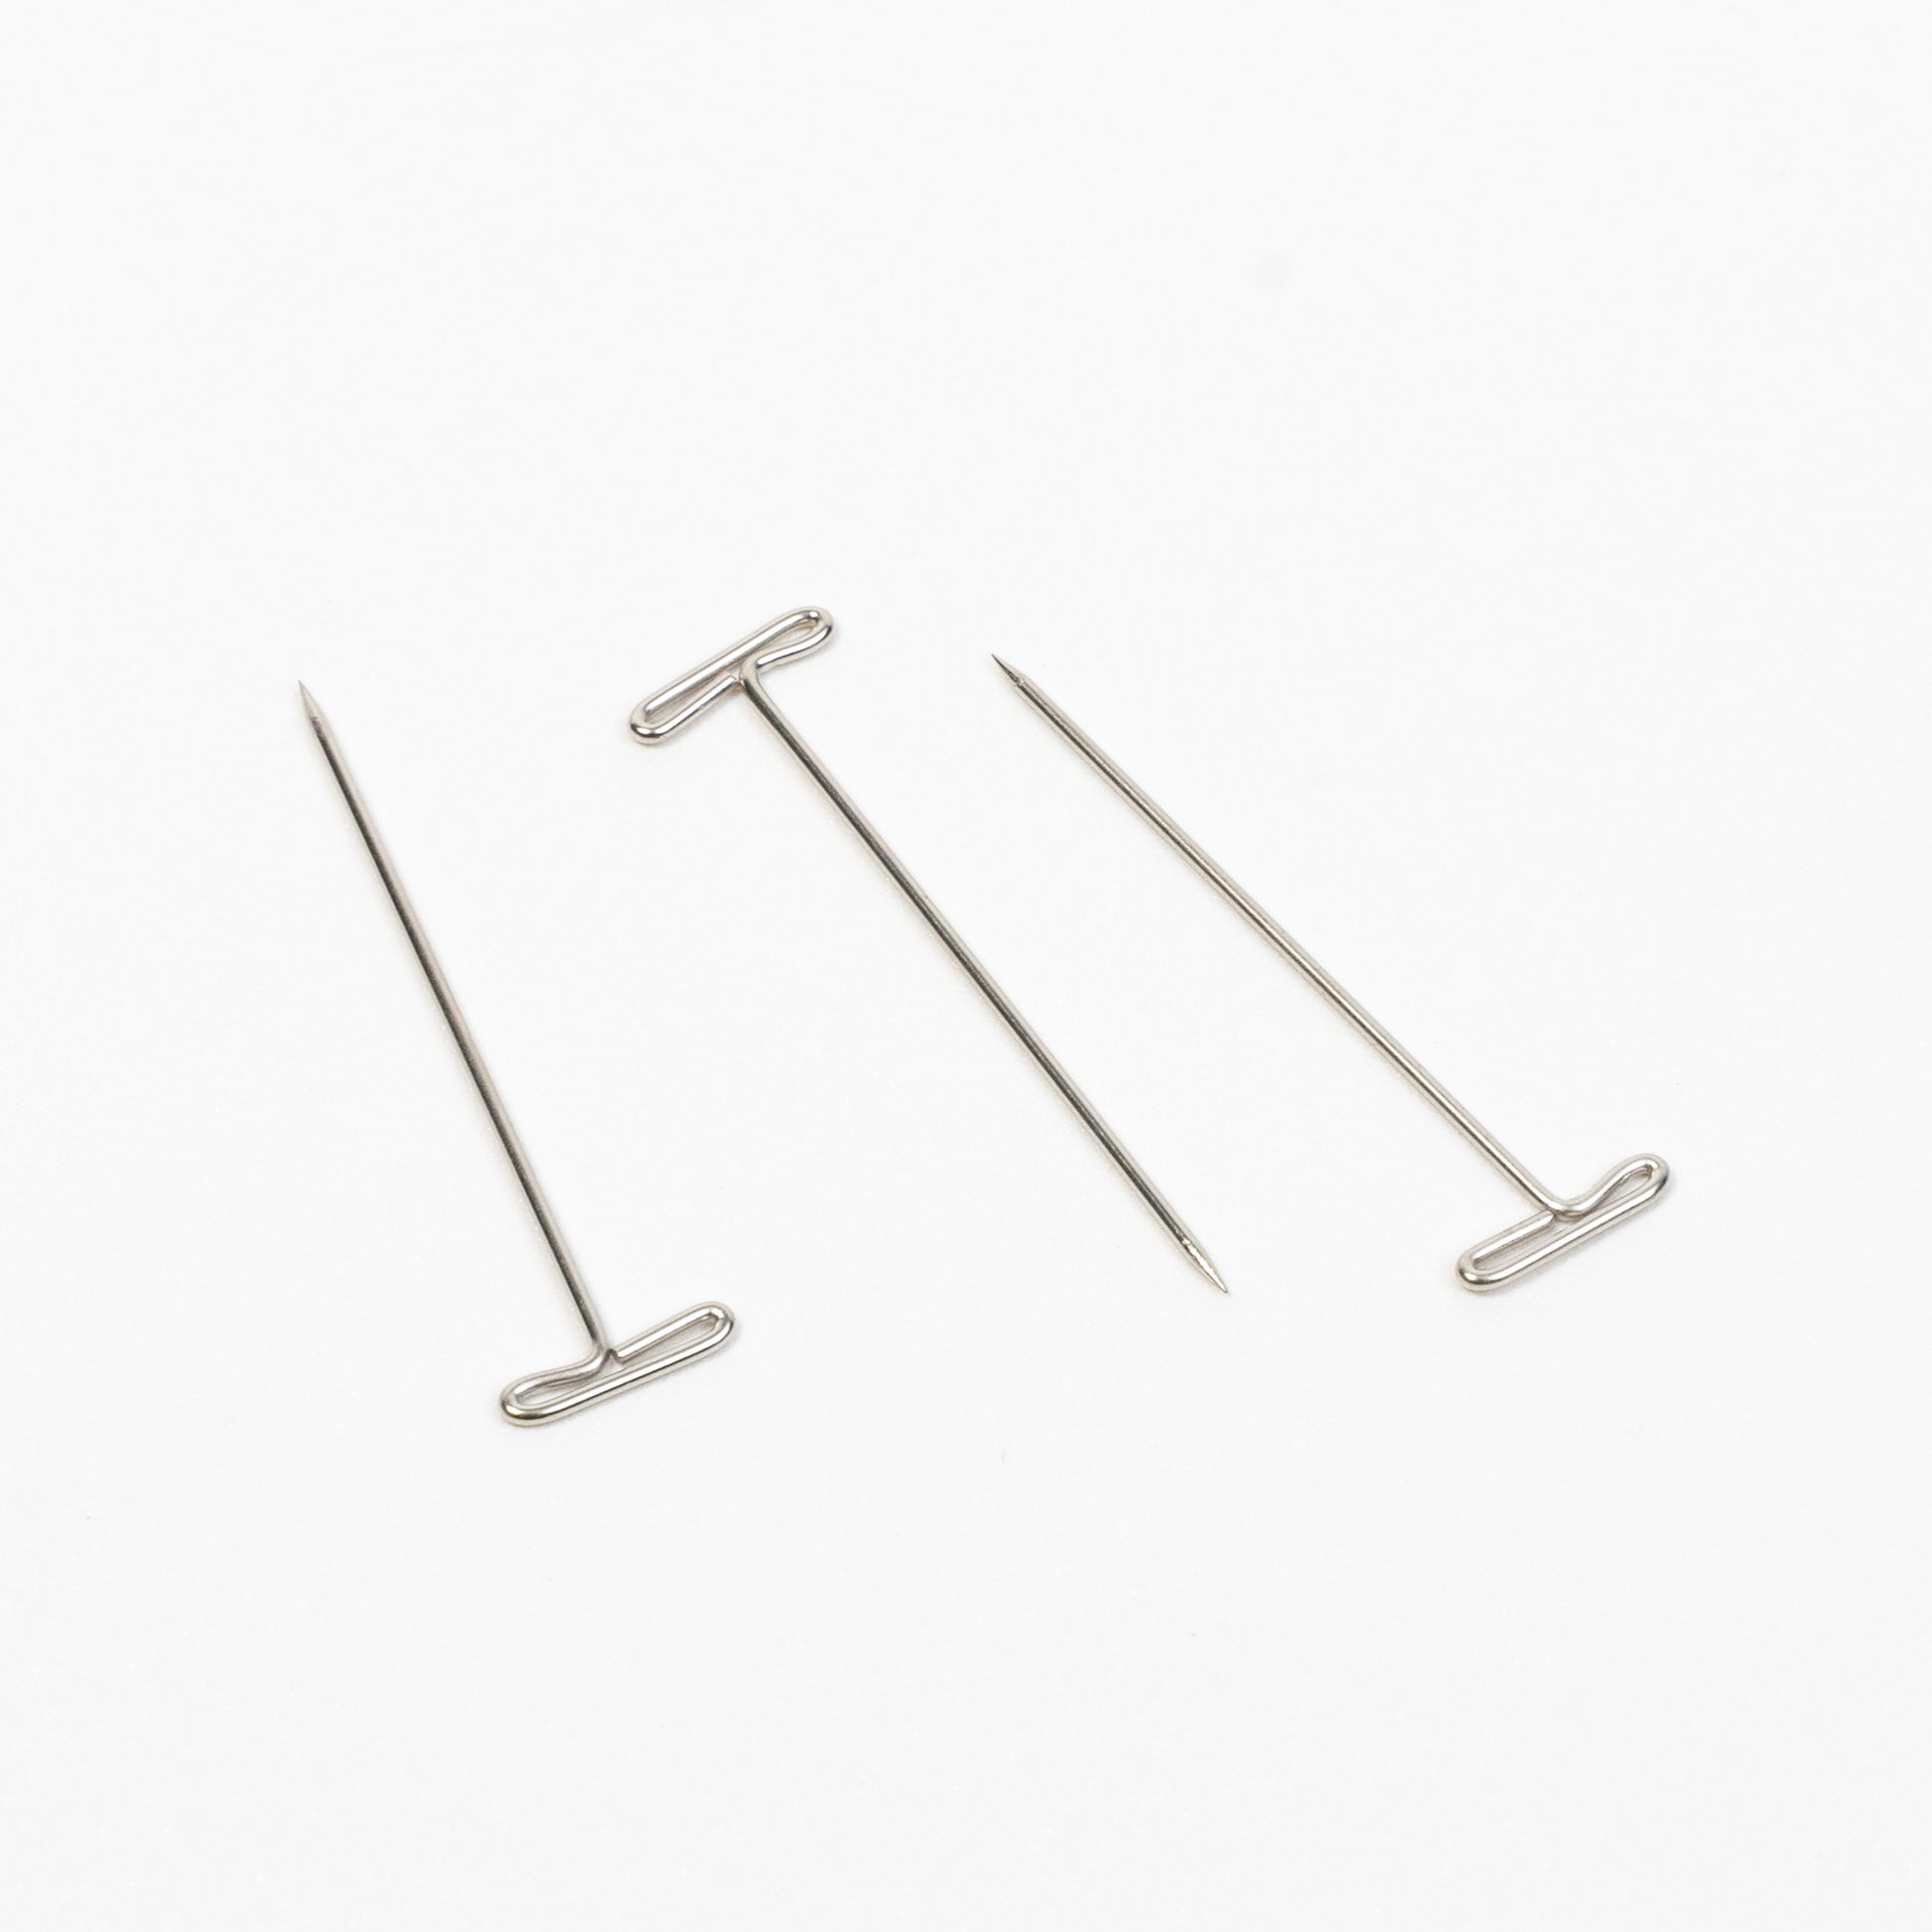 Pack of T-Pins for securing documents and fabric to surfaces